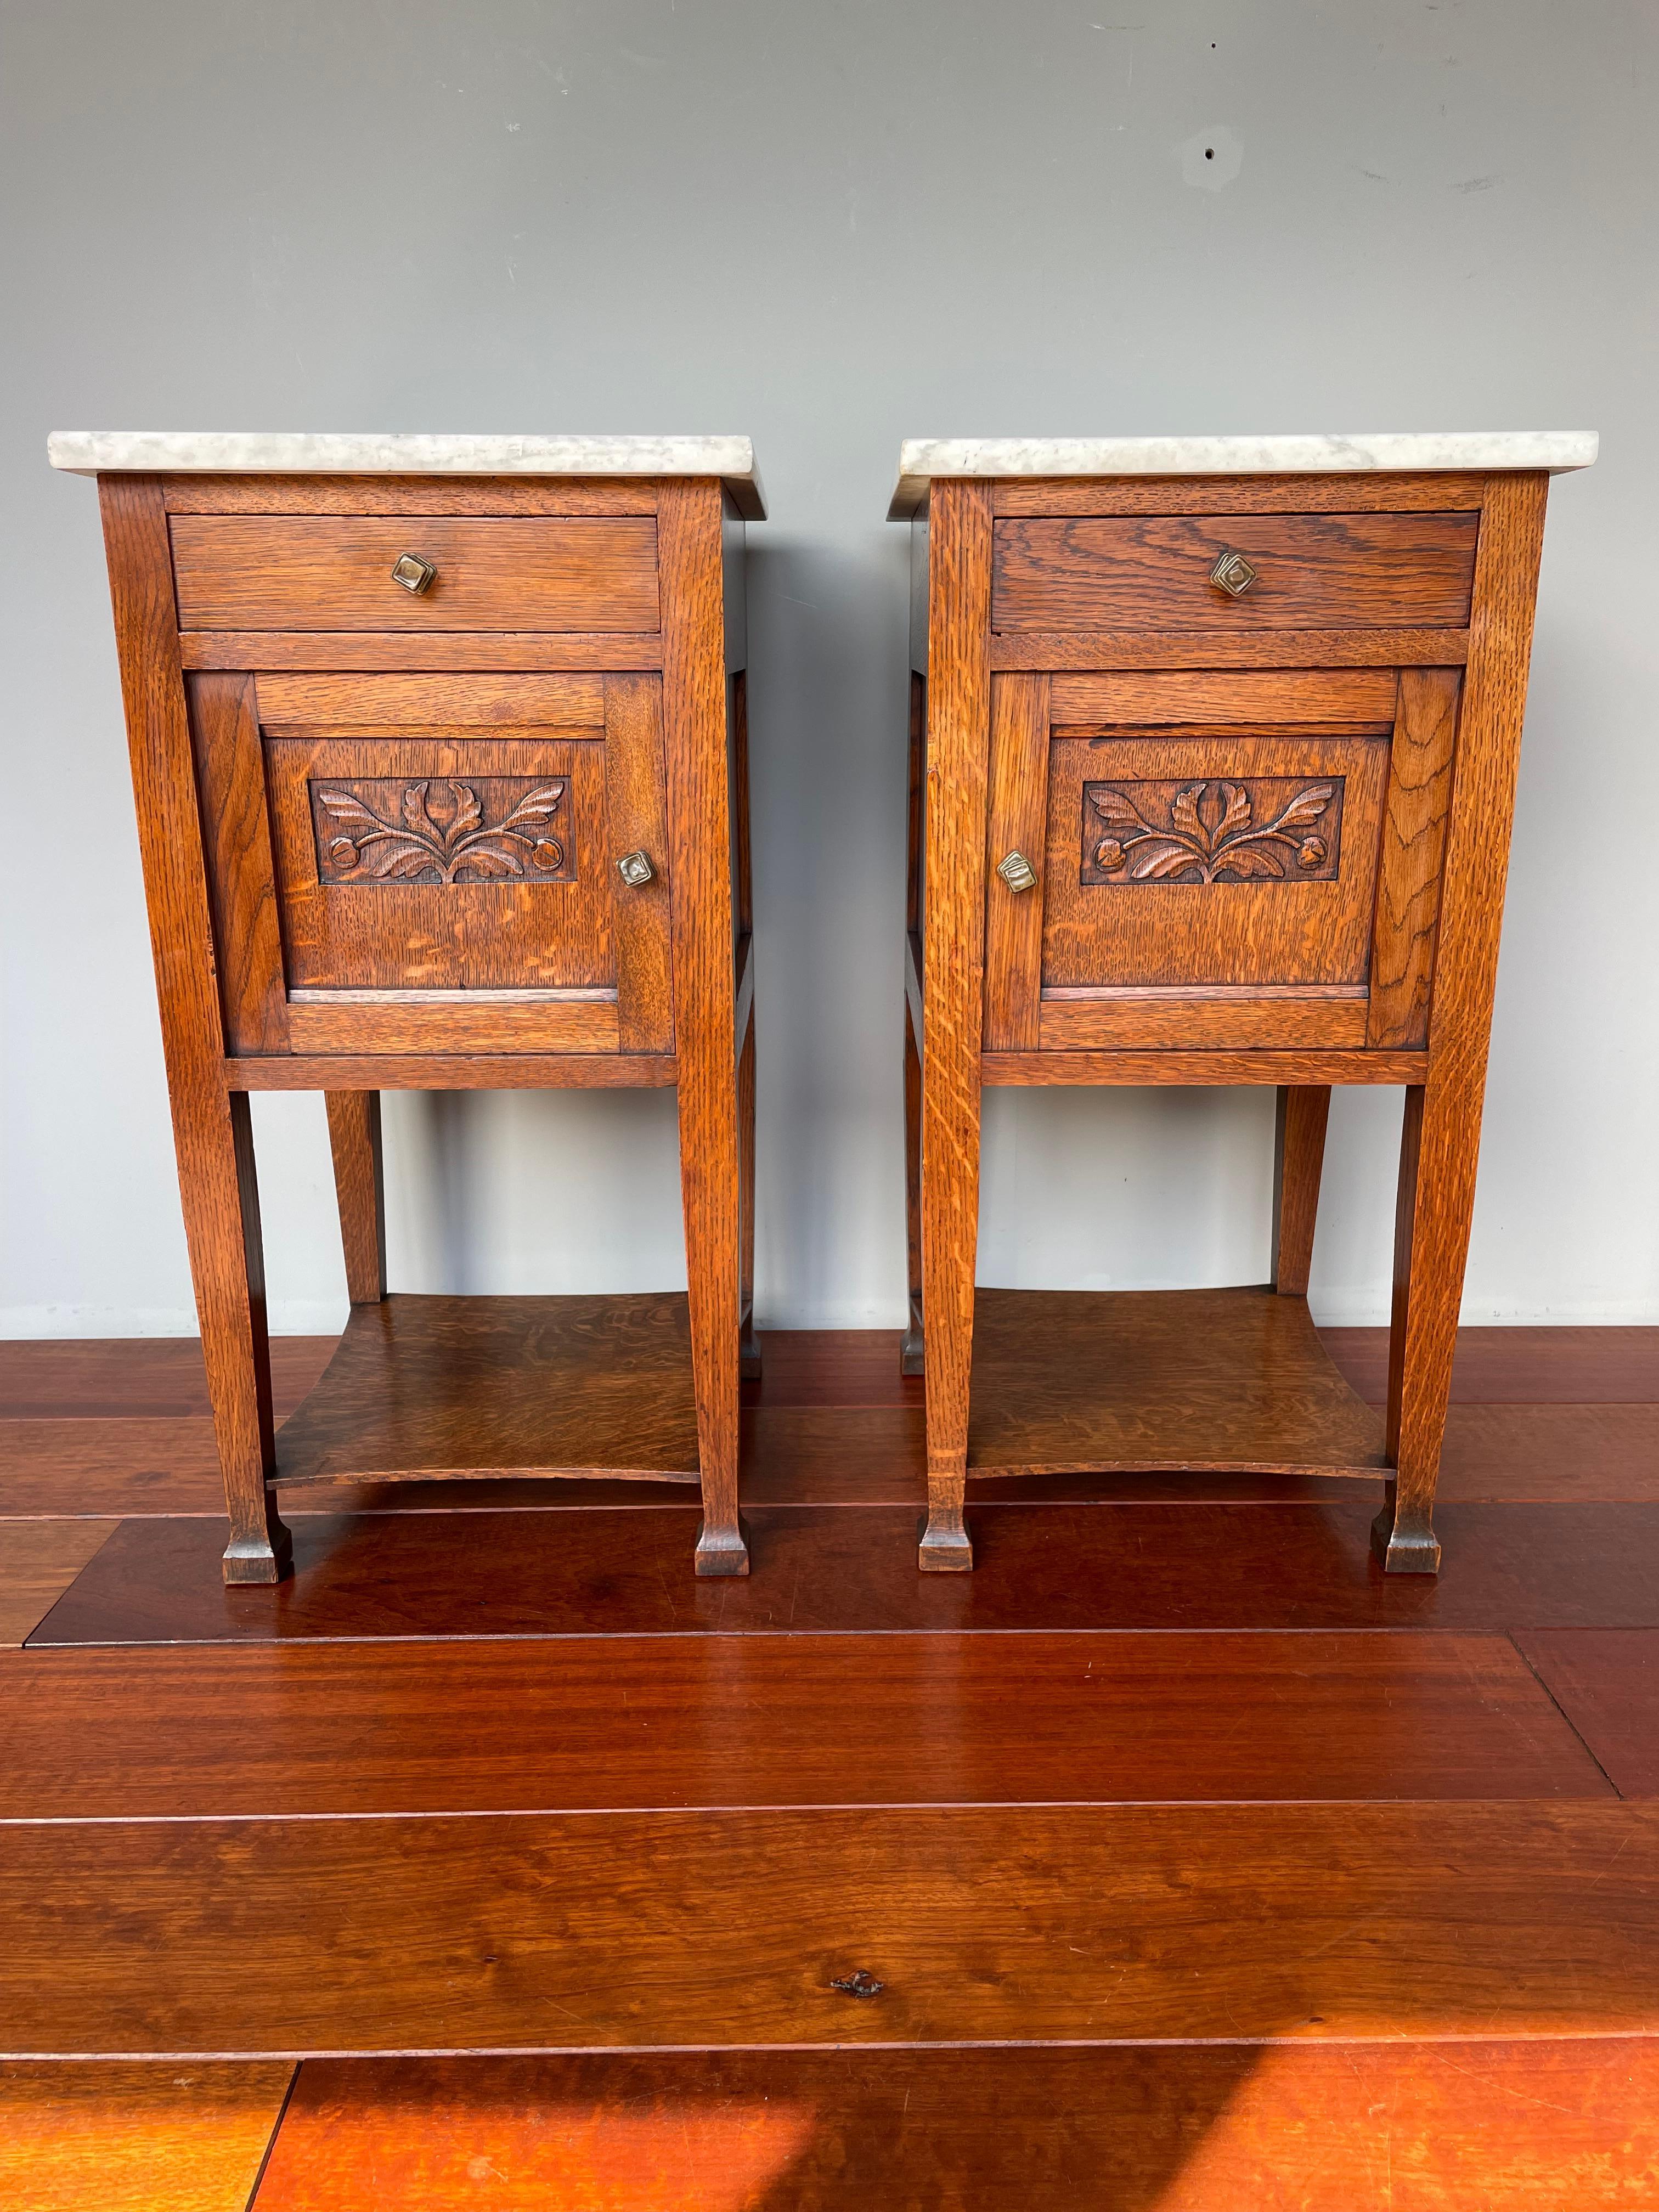 Beautiful and practical pair of Dutch Arts & Crafts nightstands with white & black marble tops.

If you are looking for timeless and beautifully handcrafted bedside cabinets then this Arts & Crafts pair could be yours to own and enjoy soon. They